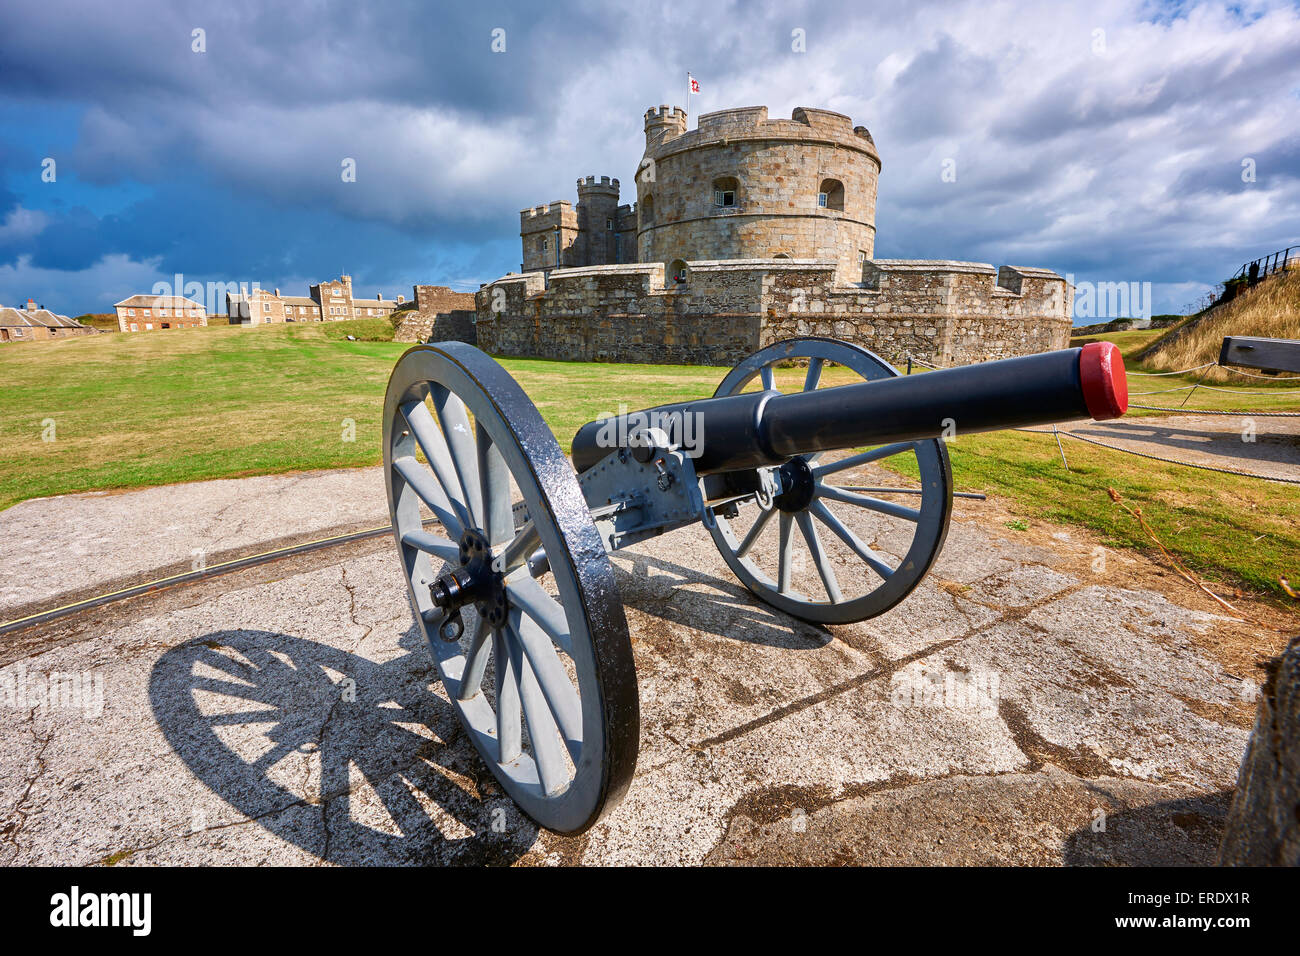 Cannon in front of Pendennis Castle Device Fort built in 1539 for Henry VIII, near Falmouth, Cornwall, England, United Kingdom Stock Photo